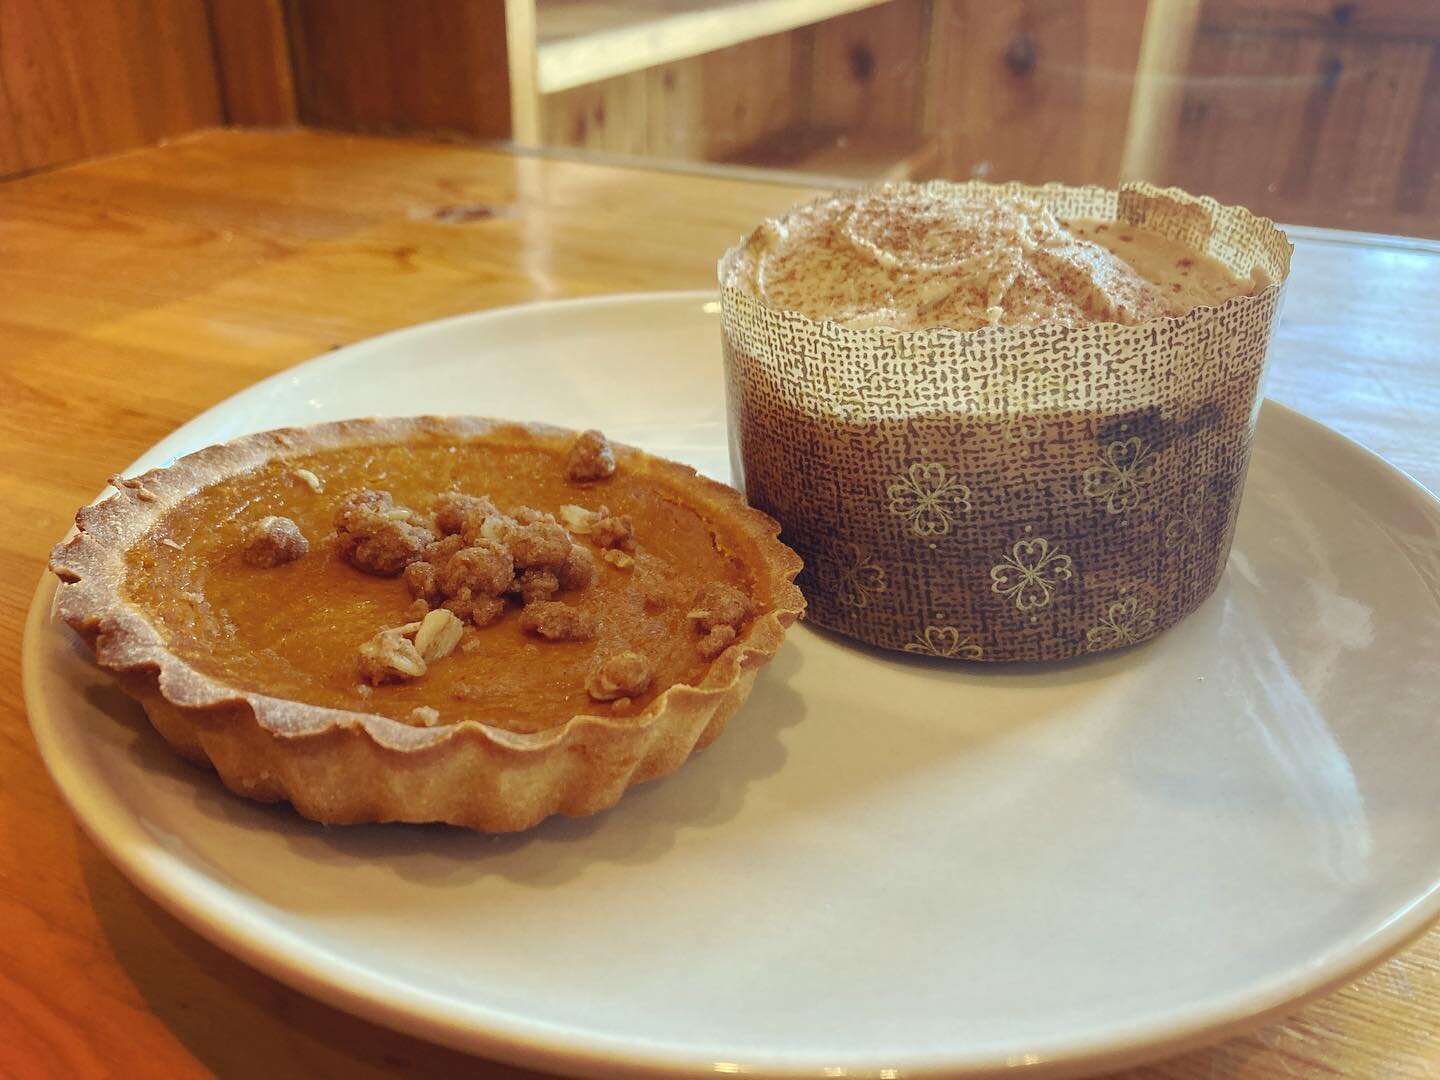 Introducing the dynamic fall duo: Pumpkin Tart and Pumpkin Cake. The tarts are topped with streusel and full of spiced pumpkin delight. The cakes are decked out in brown sugar icing--Carly's secret recipe. Come get yours, and pick up some fresh bread